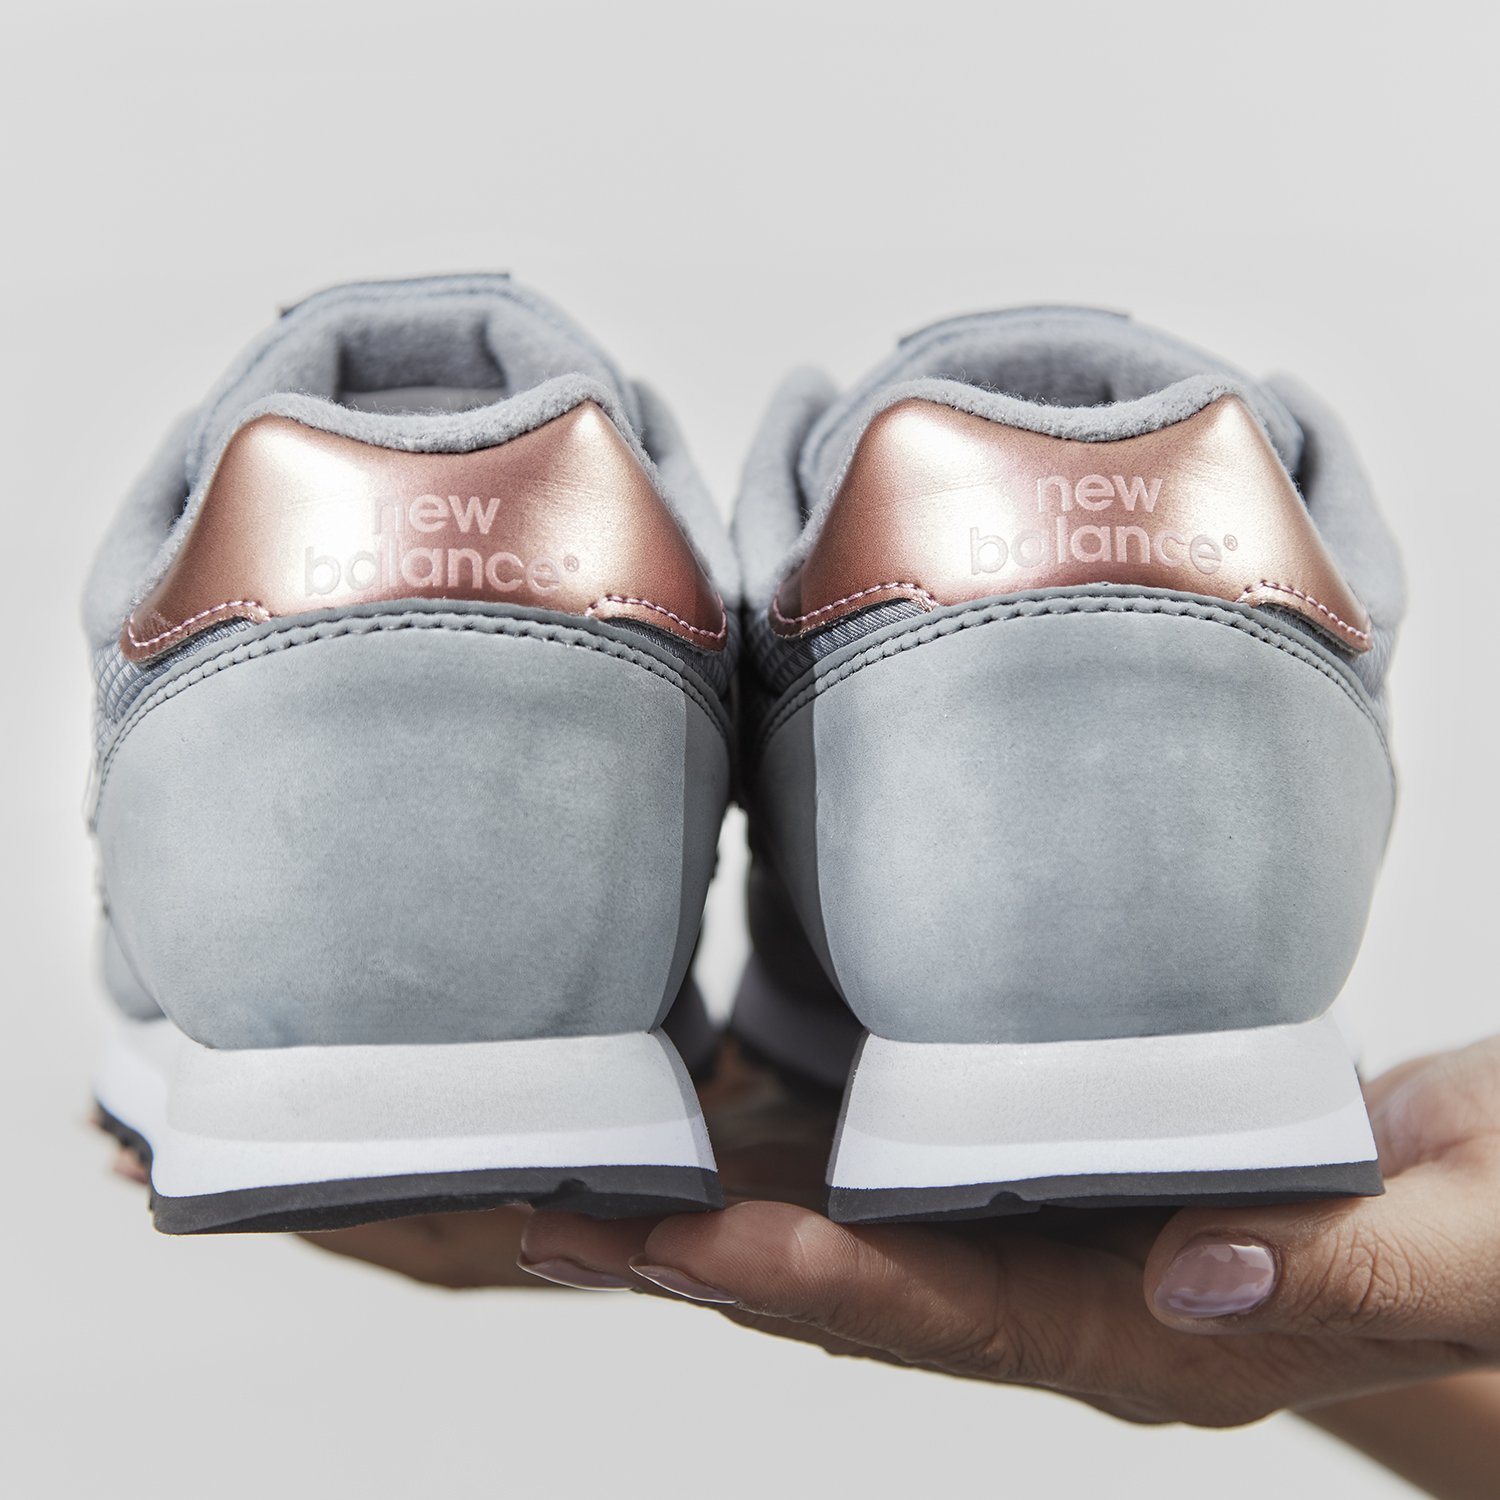 Exclusivo Viaje Bolsa JD Sports on Twitter: "#JDExclusive, the women's New Balance 373 with a  durable leather upper and rose gold details https://t.co/UgWYDK0iCZ  https://t.co/SzXVo6ird8" / Twitter